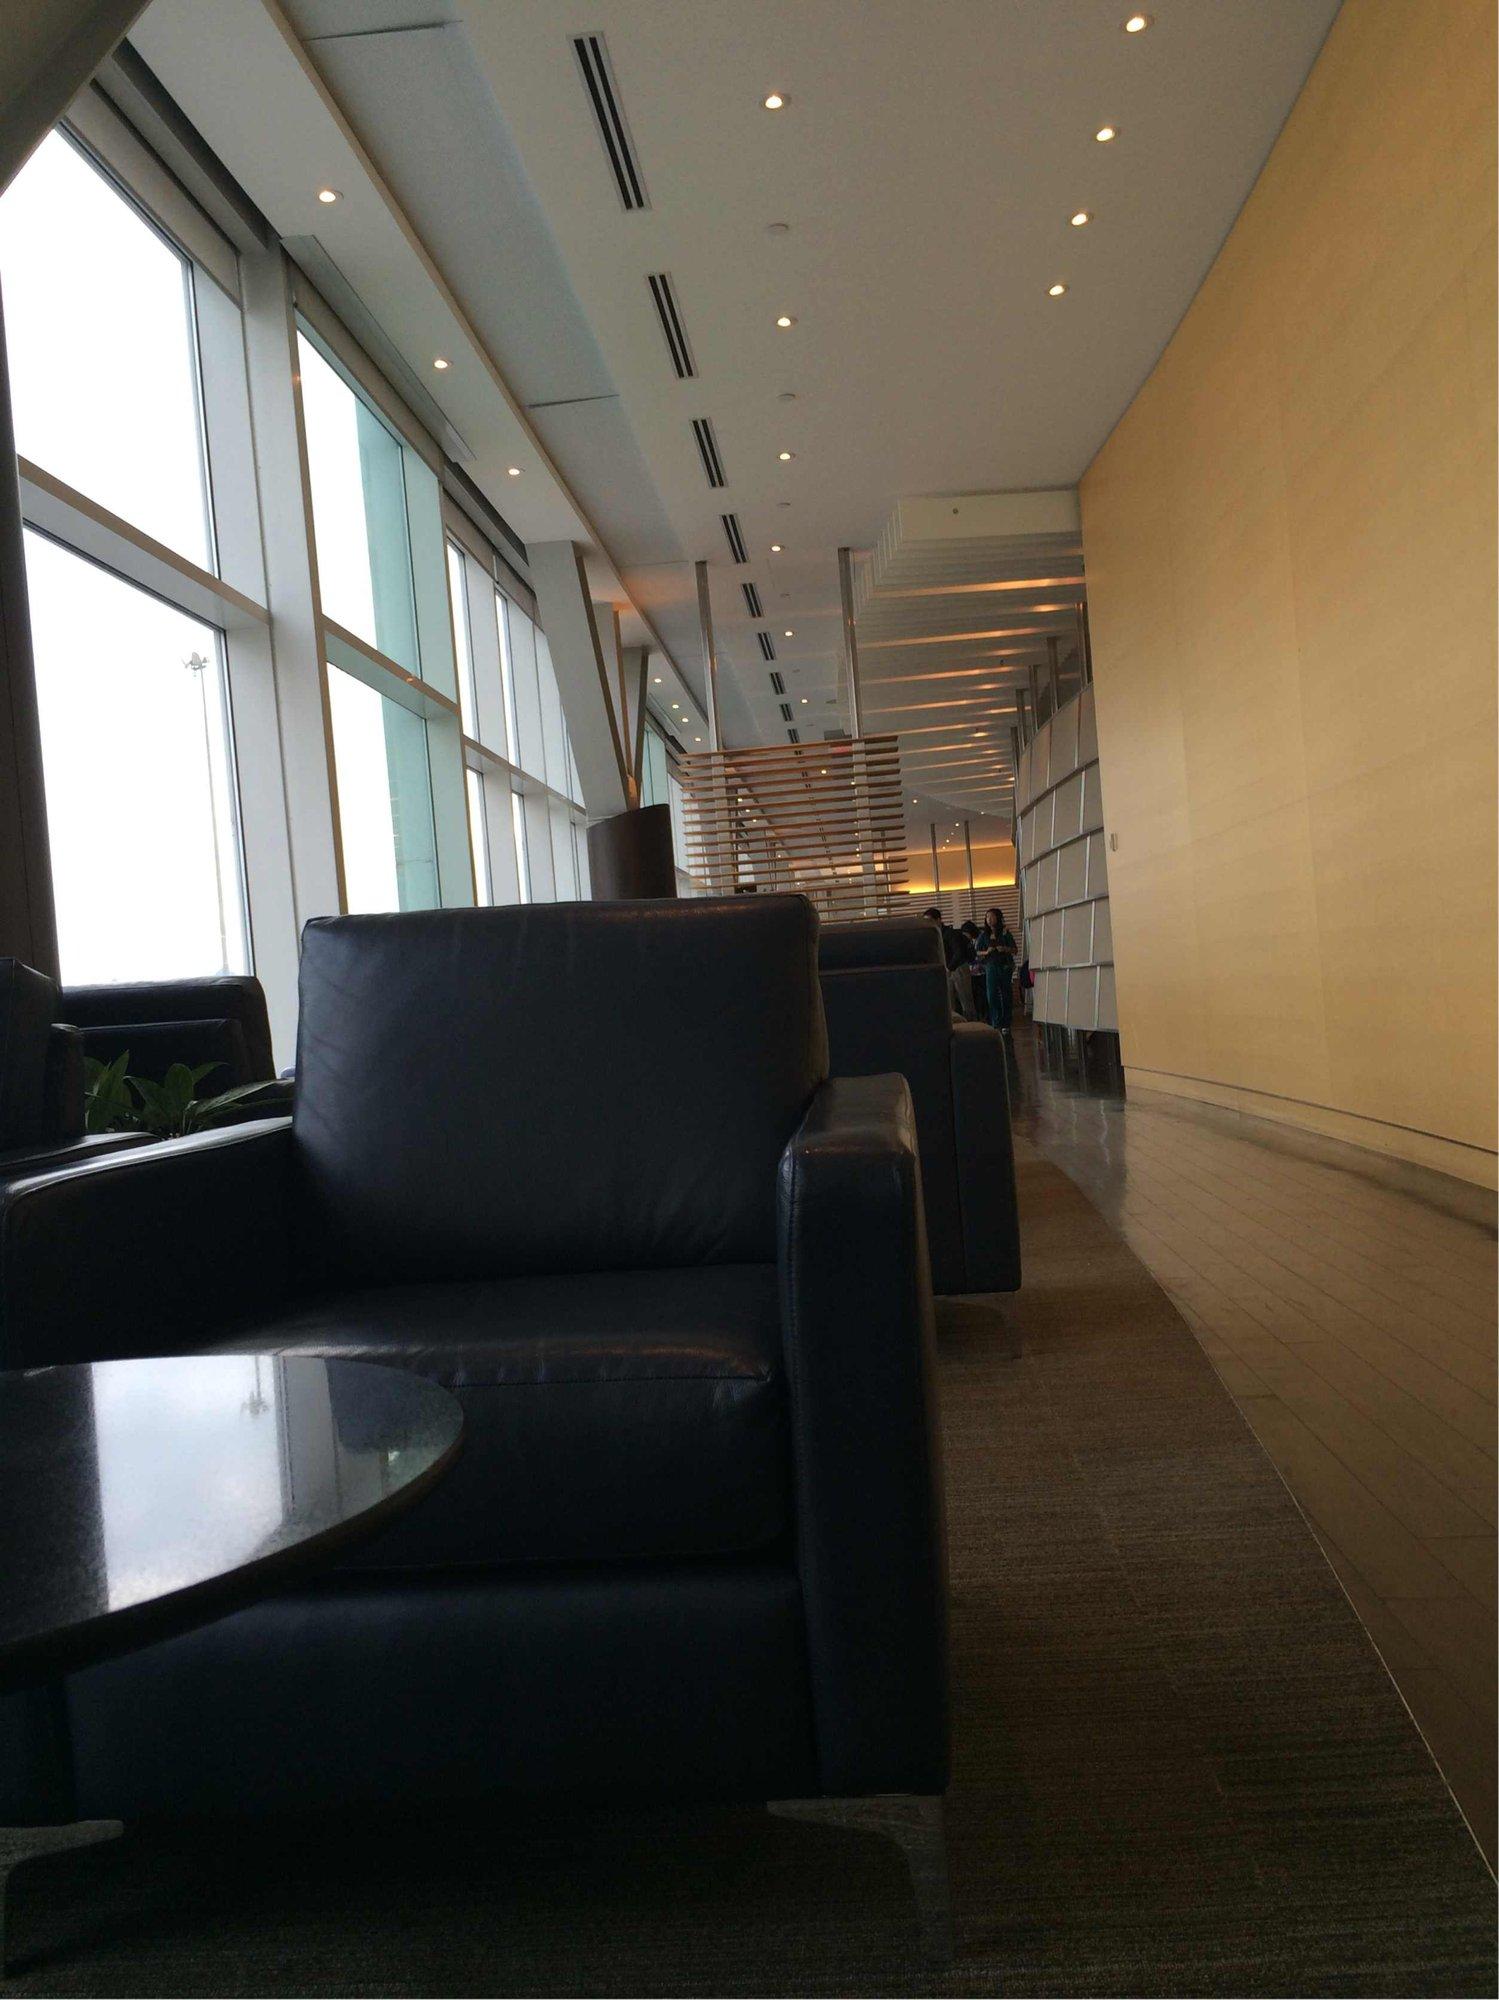 Air Canada Maple Leaf Lounge image 16 of 17